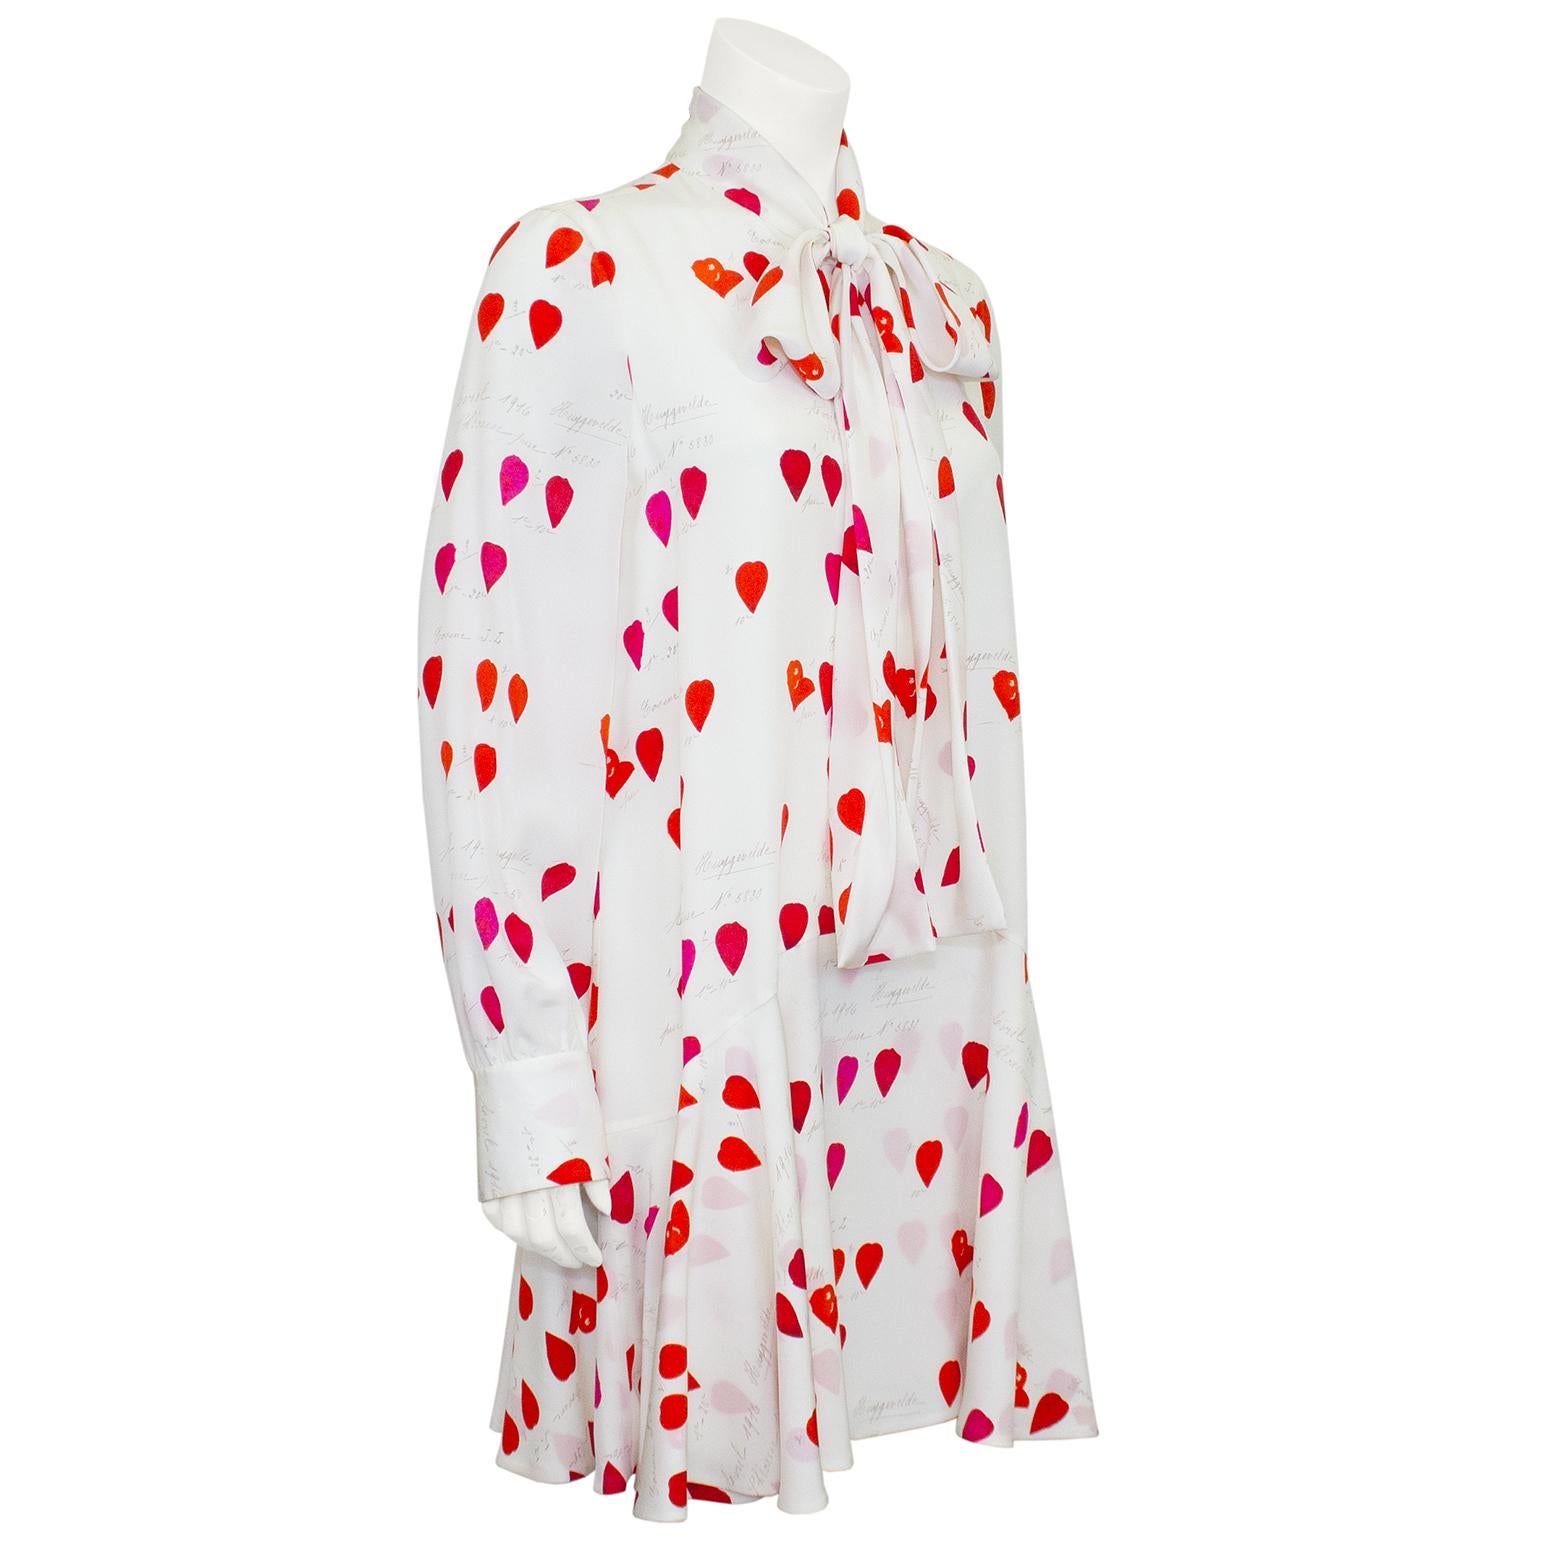 Flirty Alexander McQueen silk mini day dress/tunic from the mid 2010s. The dress has an all over red heart print on a white background with handwritten notes throughout. Lovely details of a necktie to be worn tied or loose at the neckline. Flounce